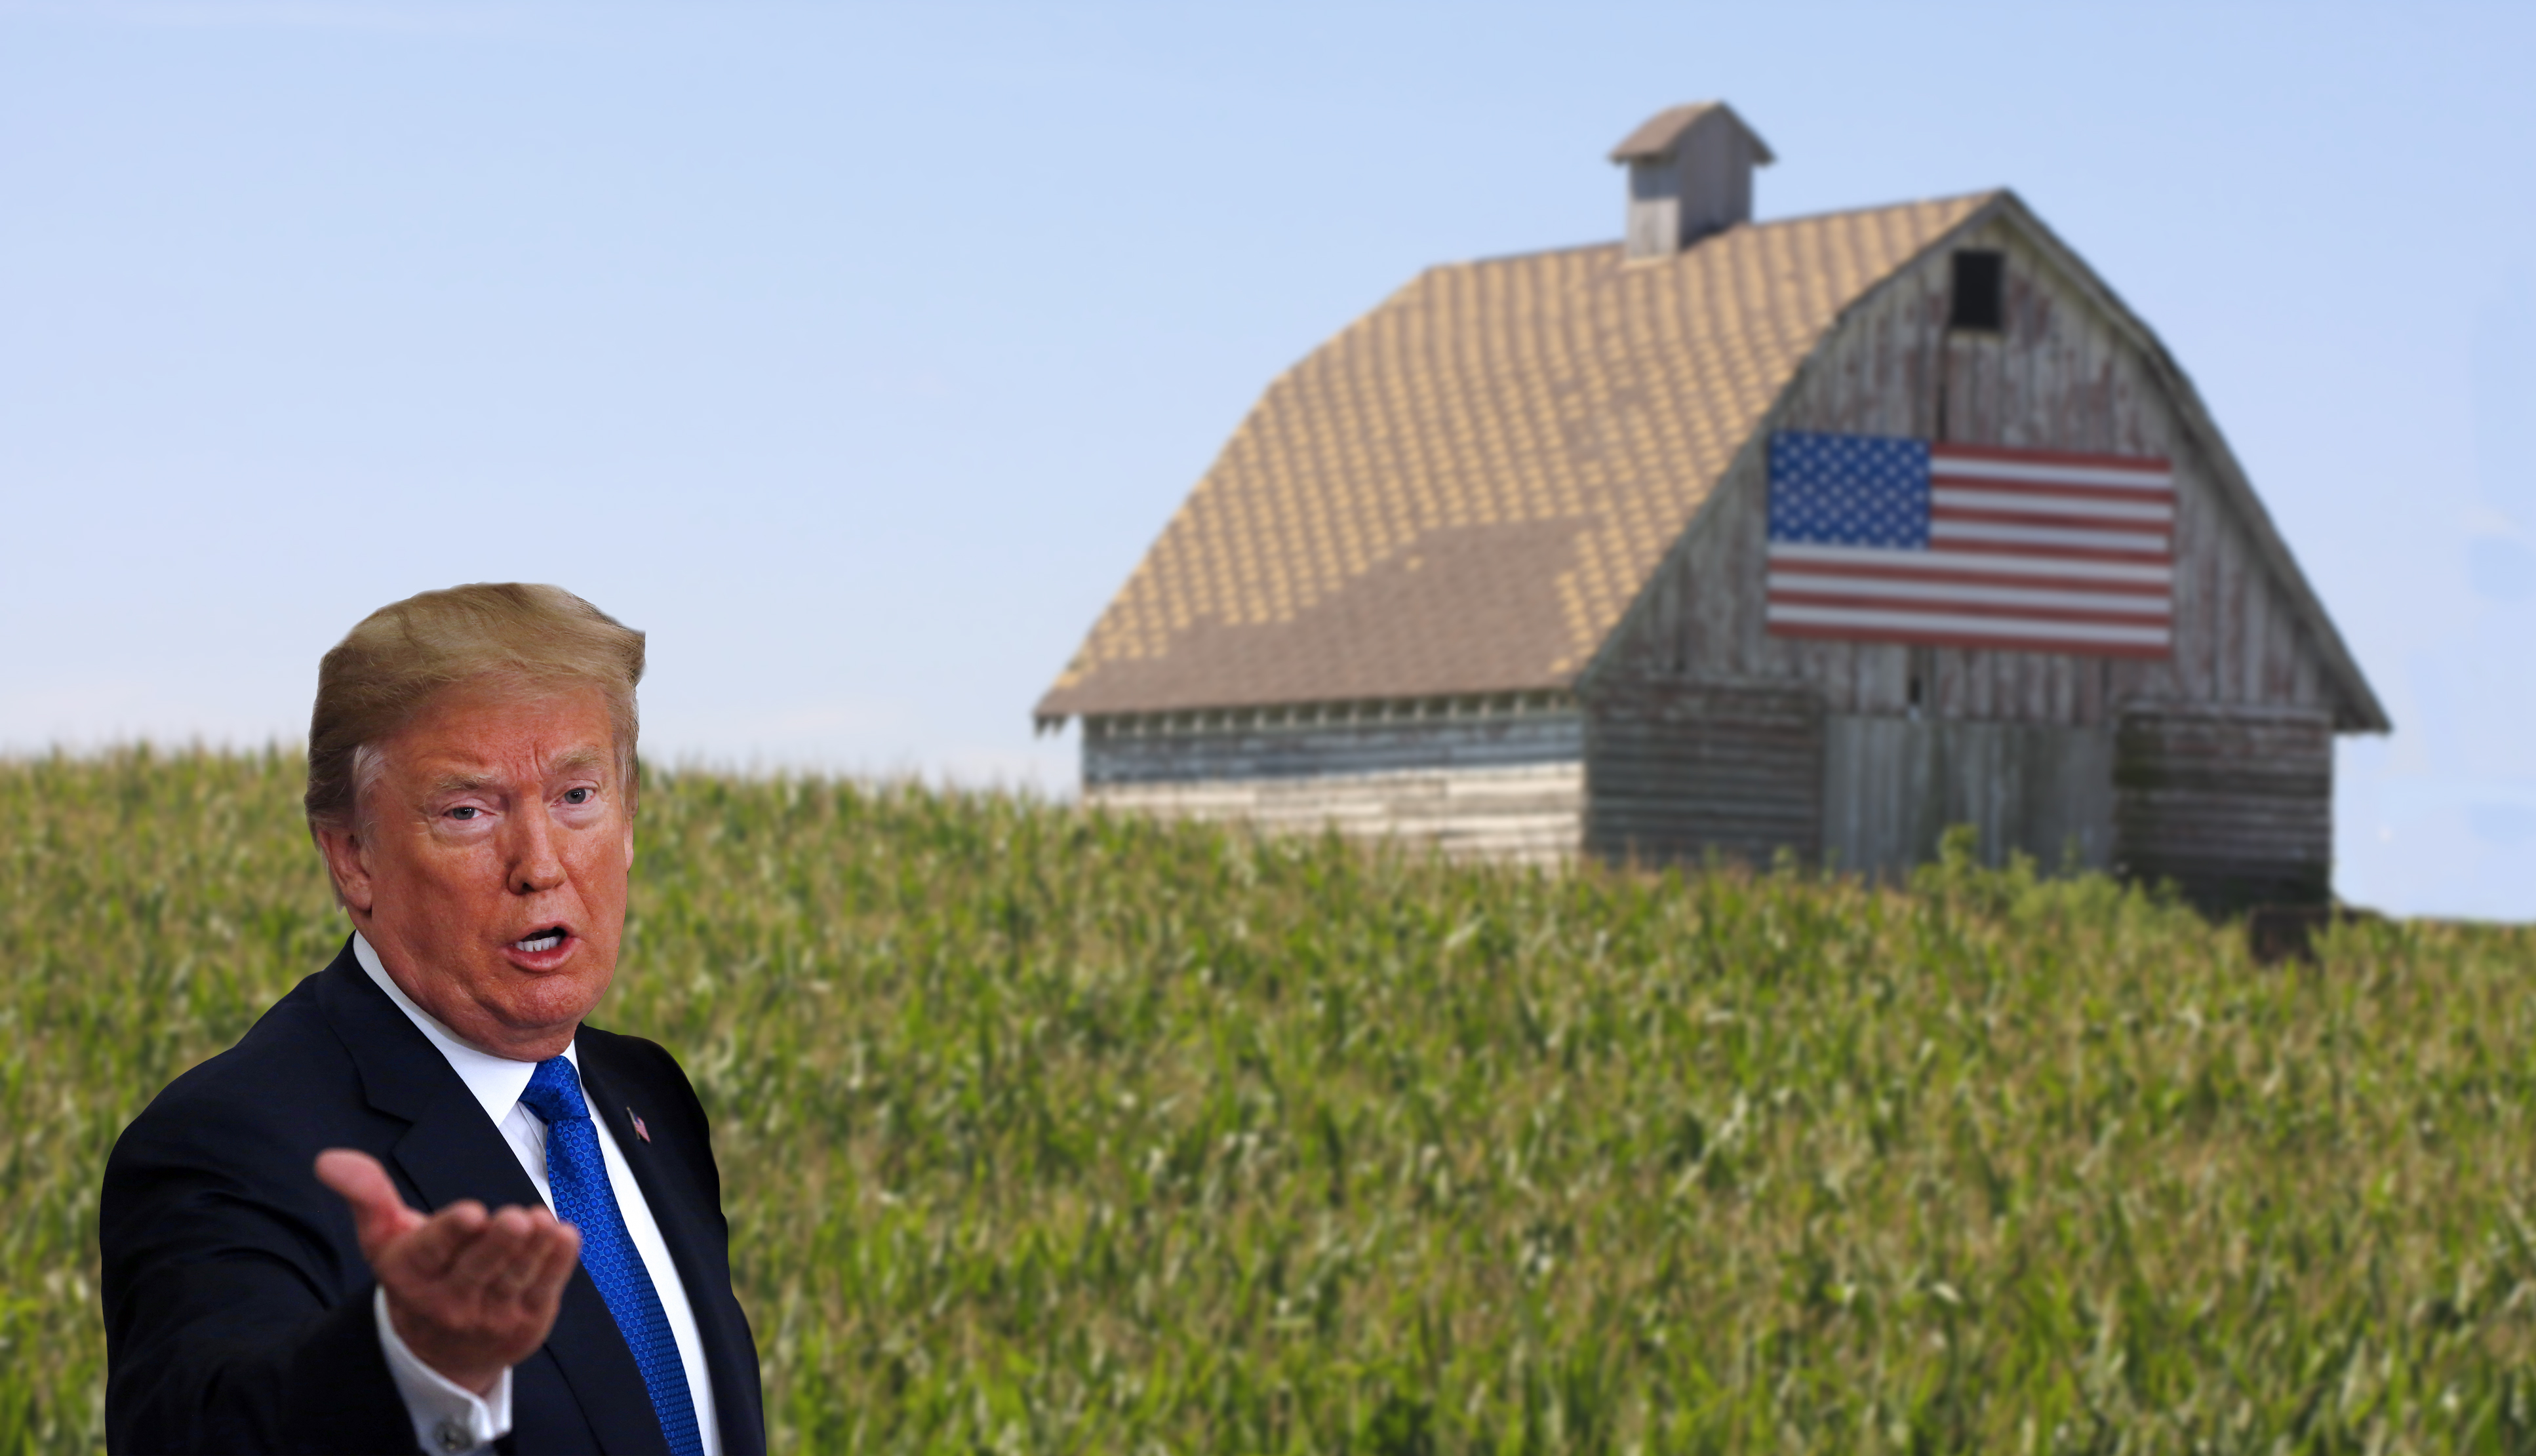 President Trump extends hand to Americans especially farmers after failed tariff war